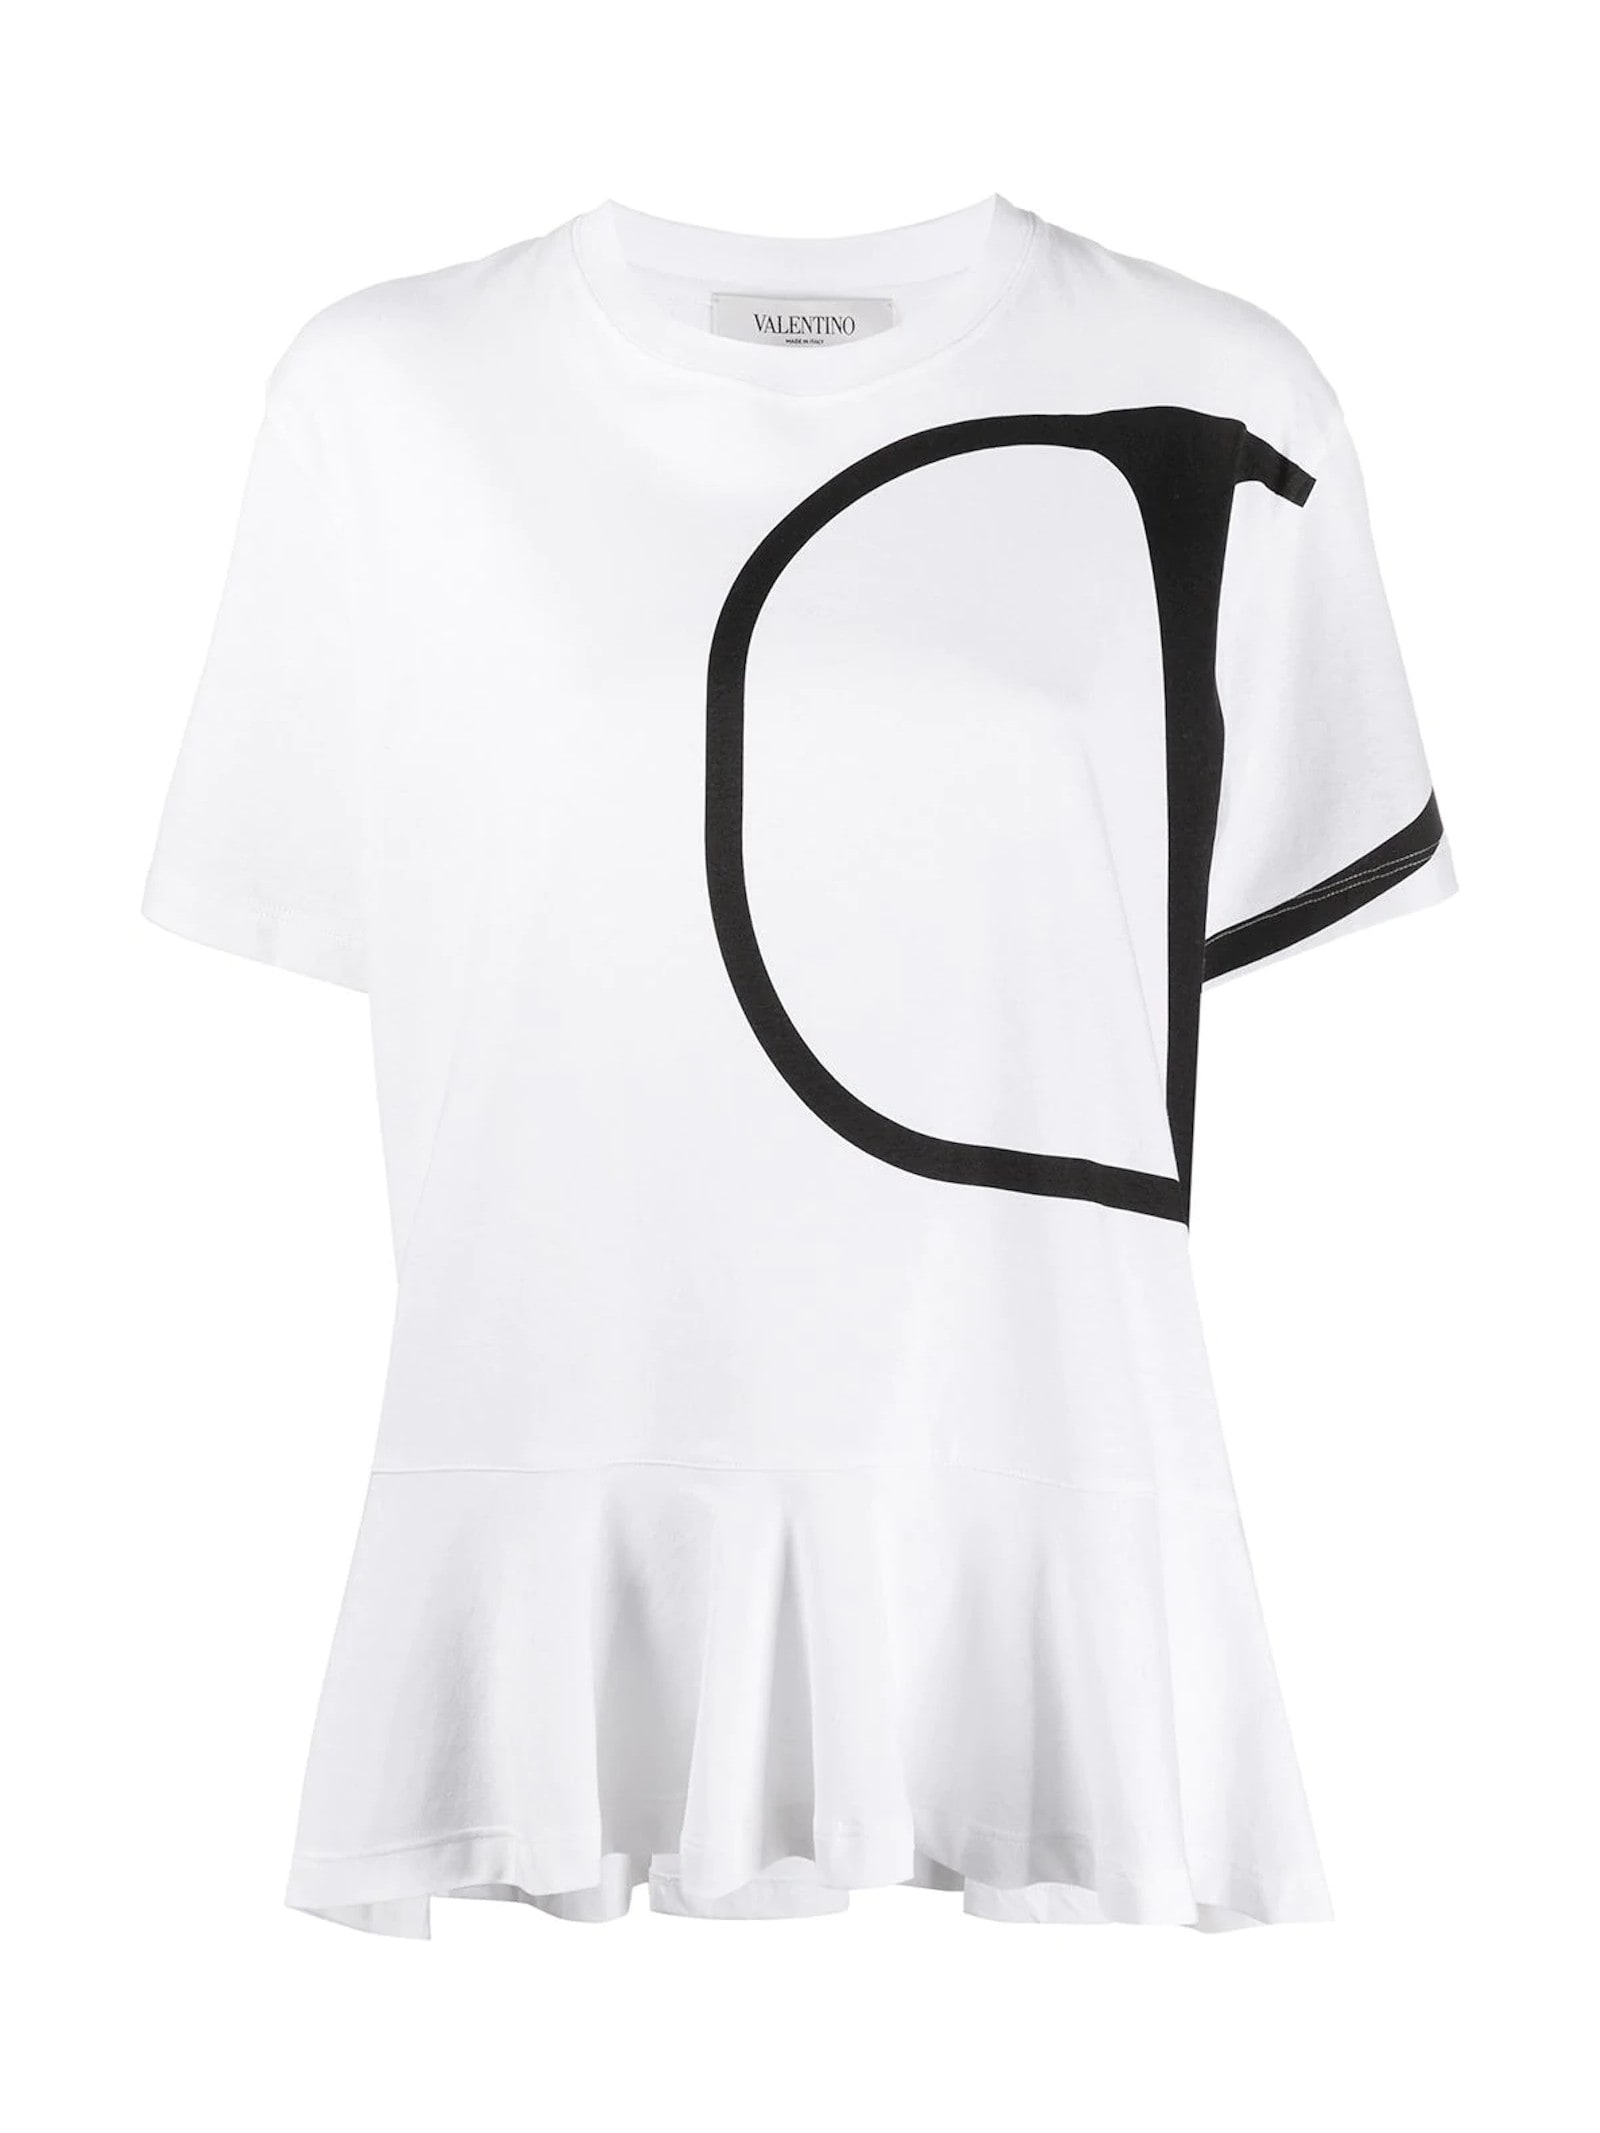 VALENTINO T-SHIRT LOGO WITH SPRINGS,11214392